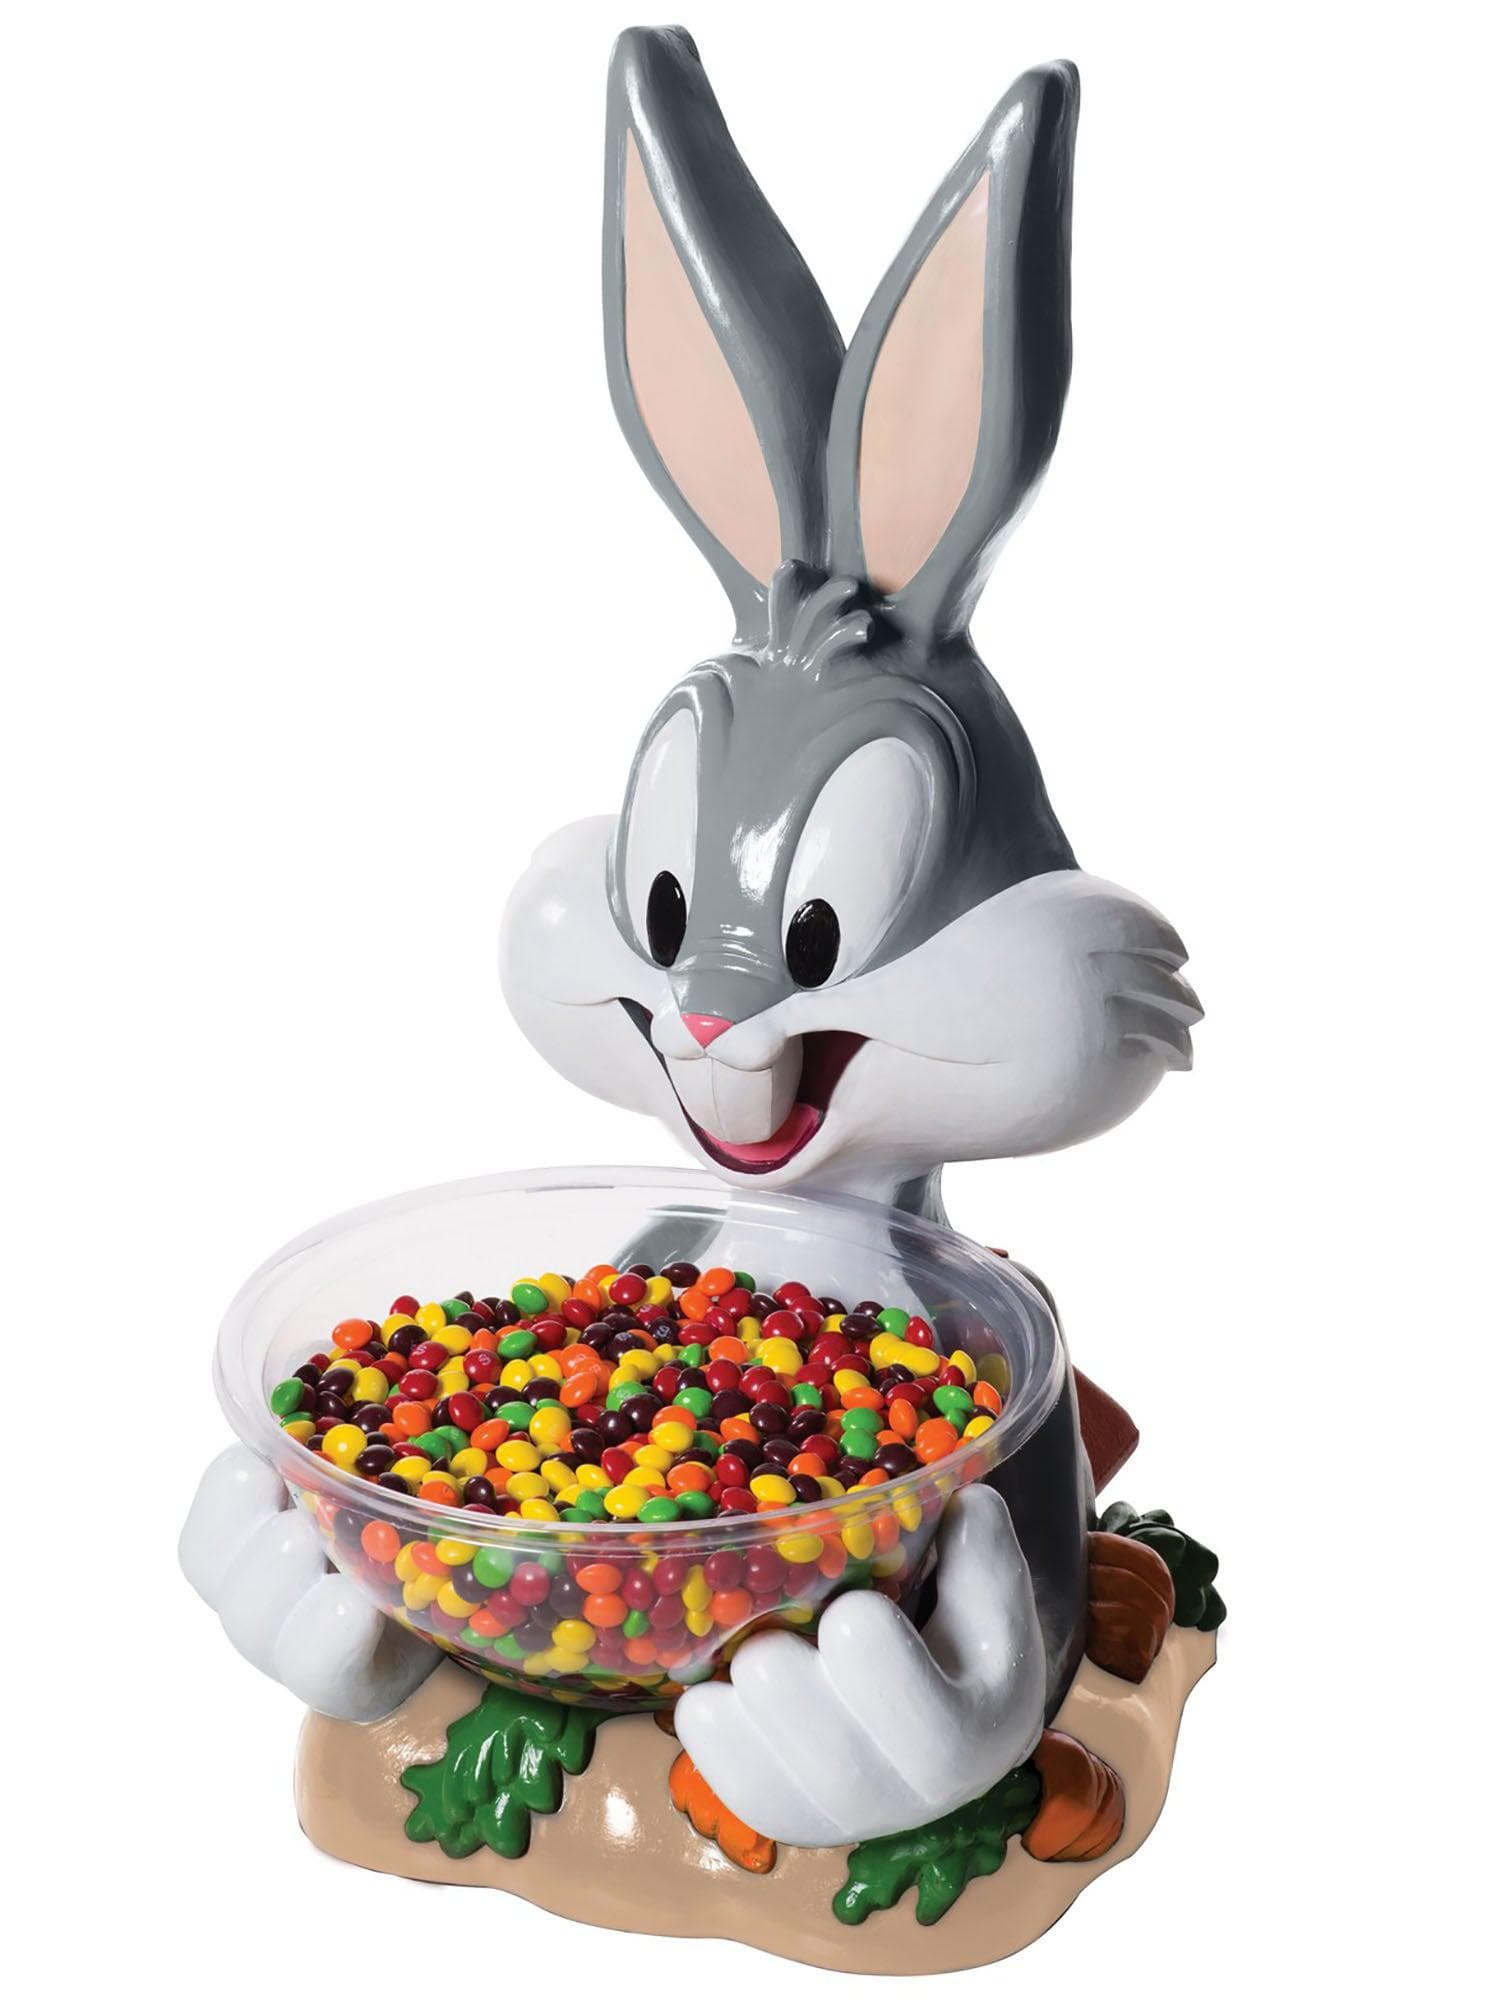 Bugs Bunny Candy Bowl Holder - costumes.com